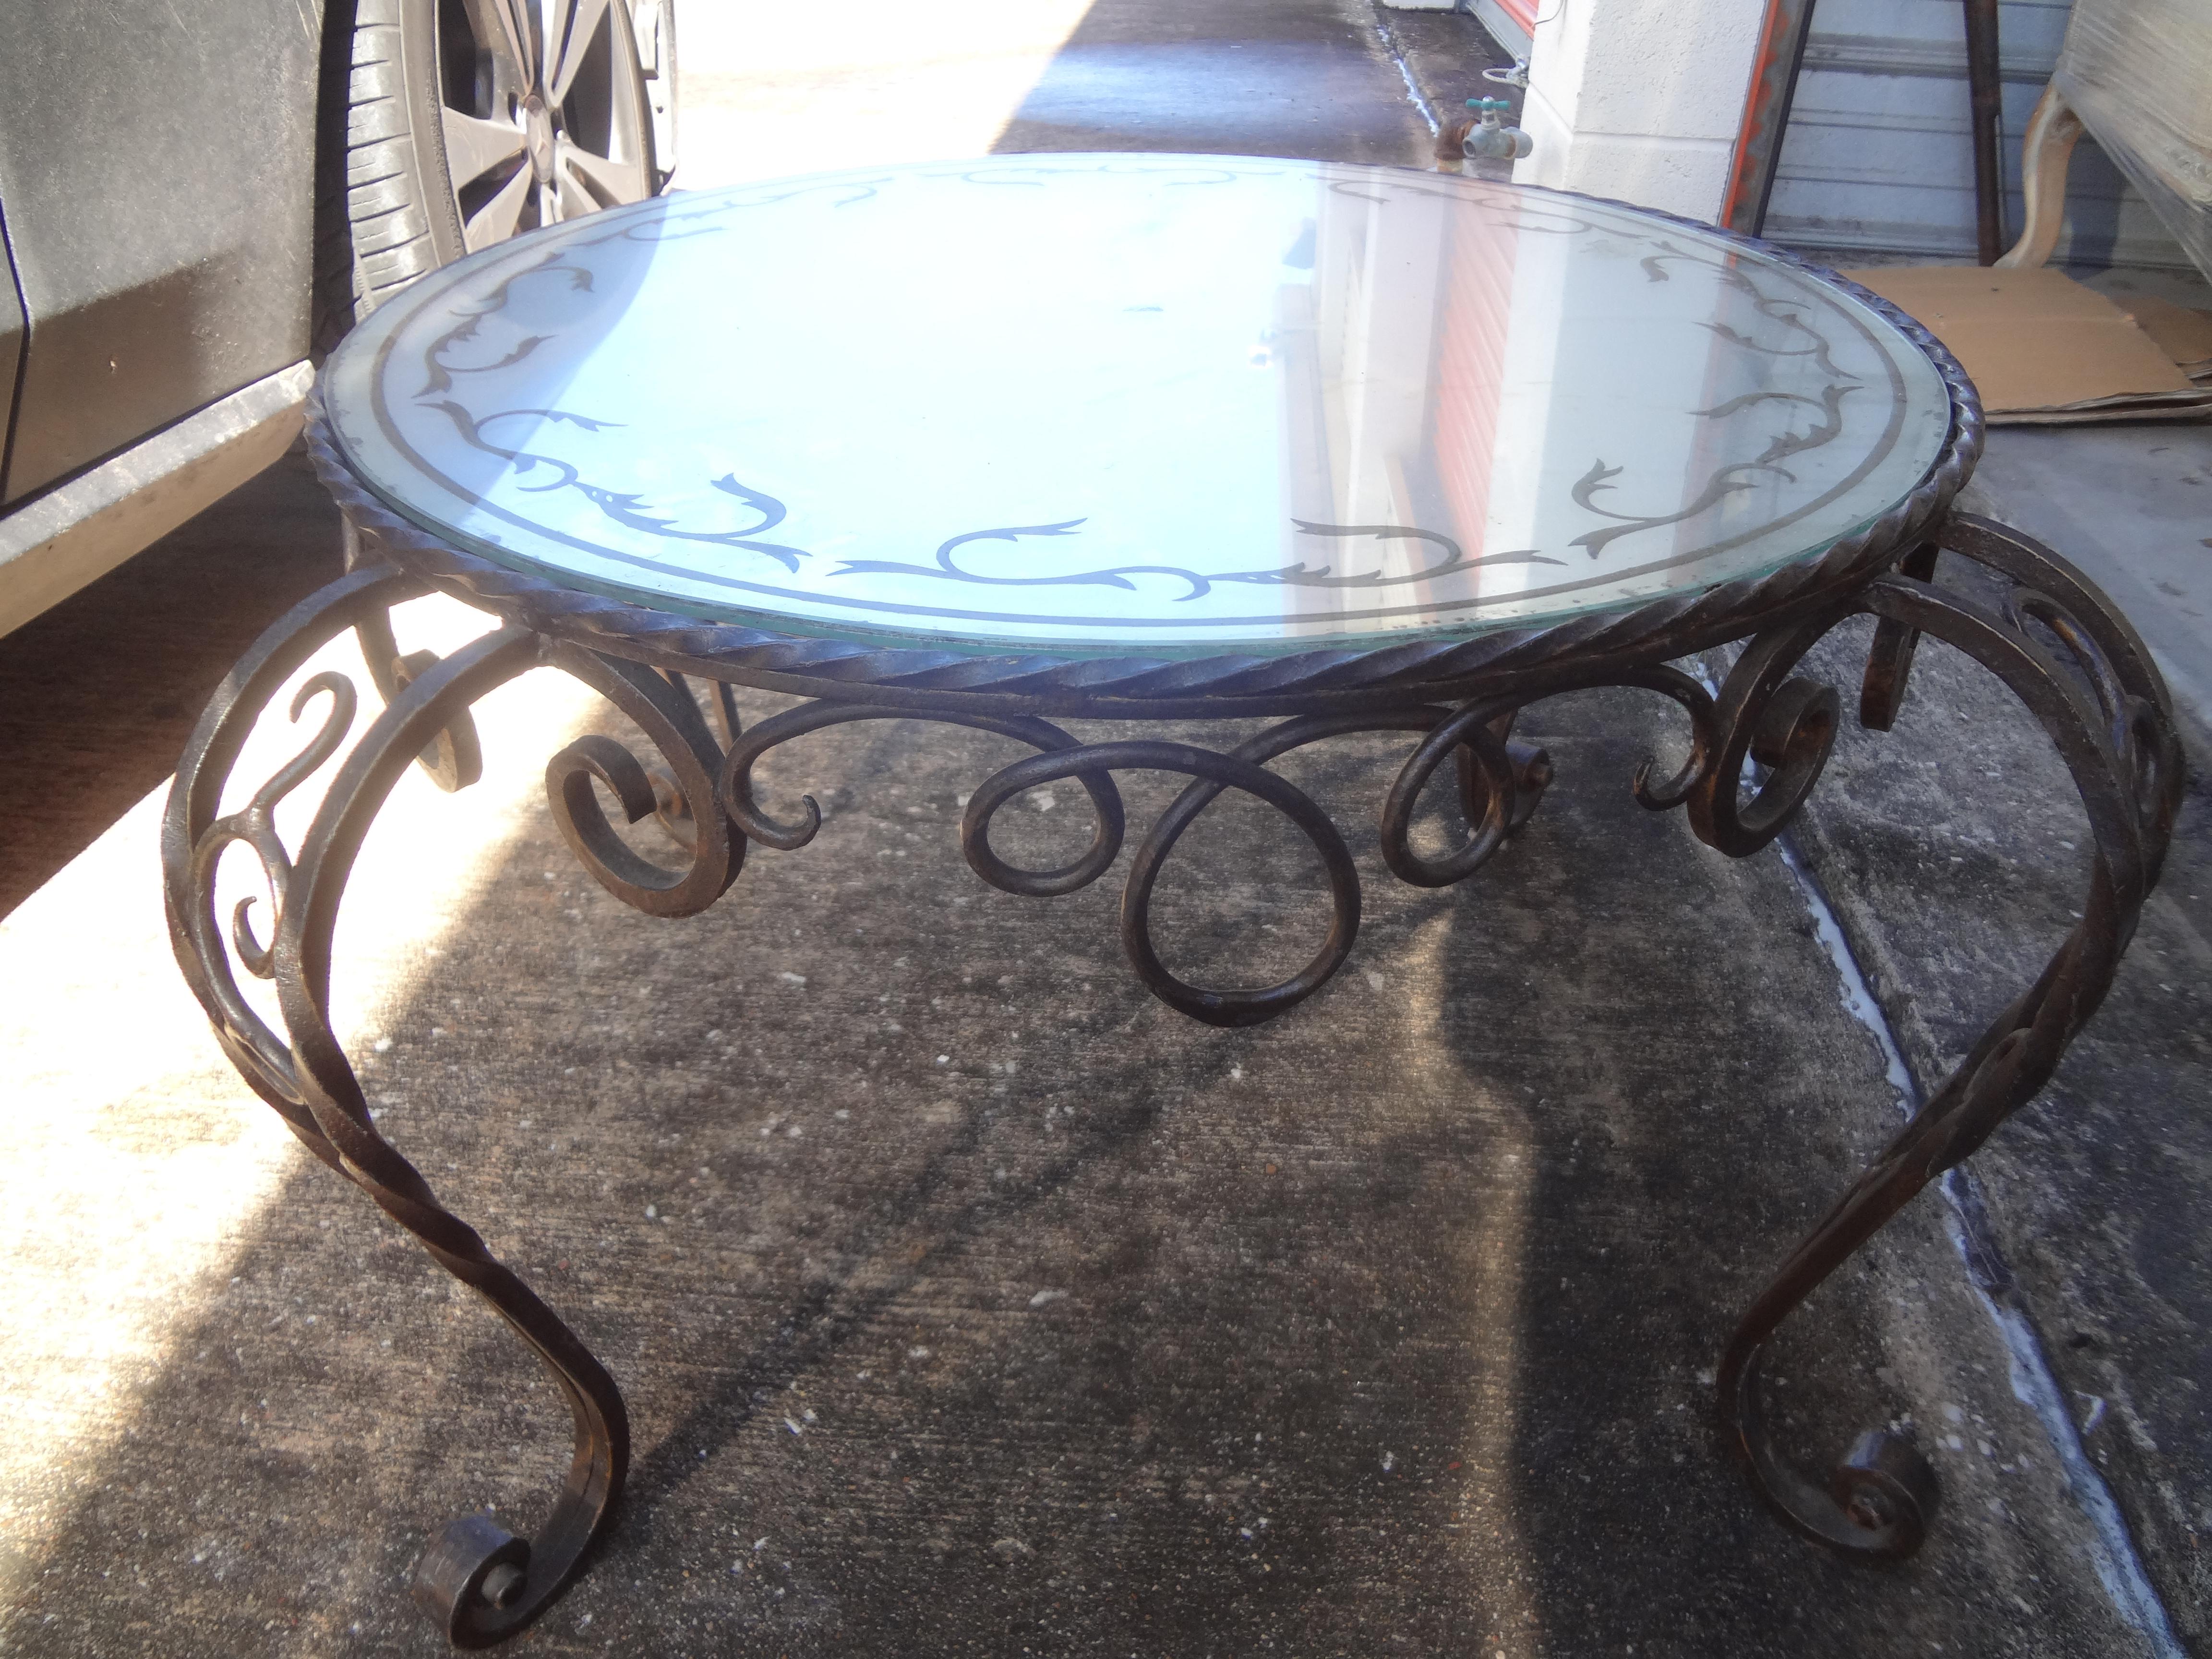 French wrought iron cocktail table with Églomisé Top Attributed To René Drouet.
Great French 1940s round hand forged wrought iron cocktail table or coffee table with gilt decorated eglomise top.
The églomisé (reverse decorated) mirrored top has